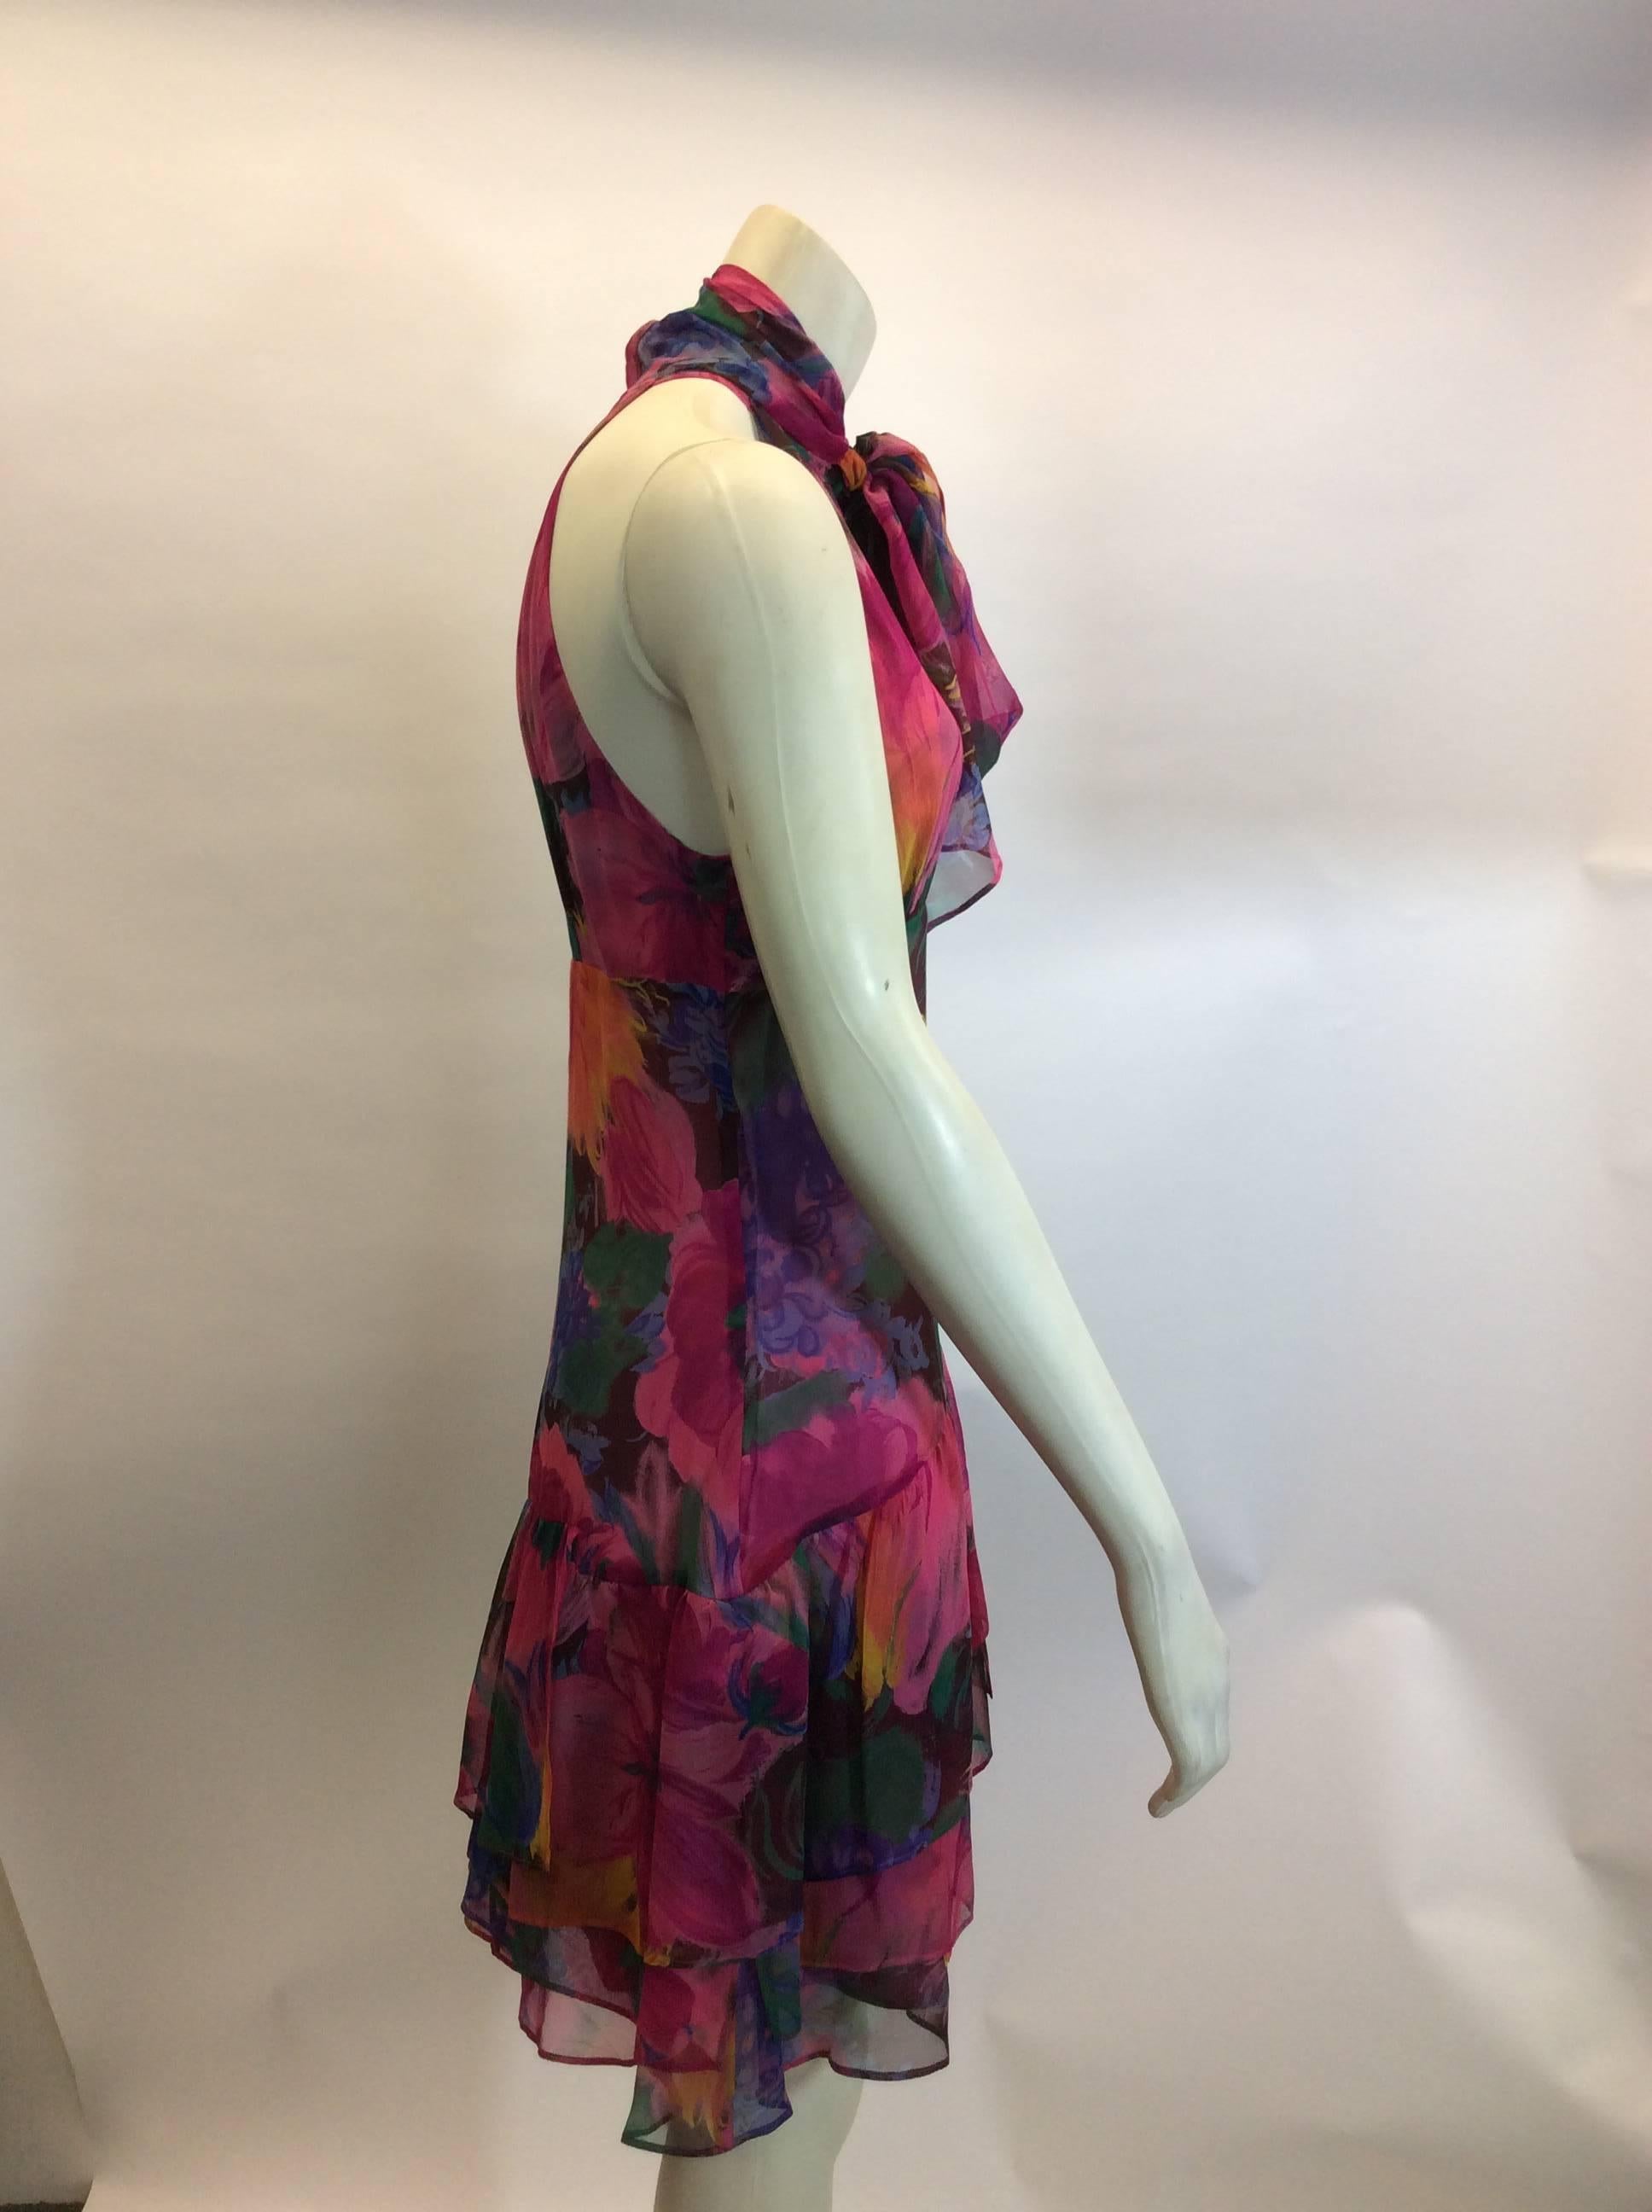 Dolce & Gabbana Floral Silk Dress In Excellent Condition For Sale In Narberth, PA